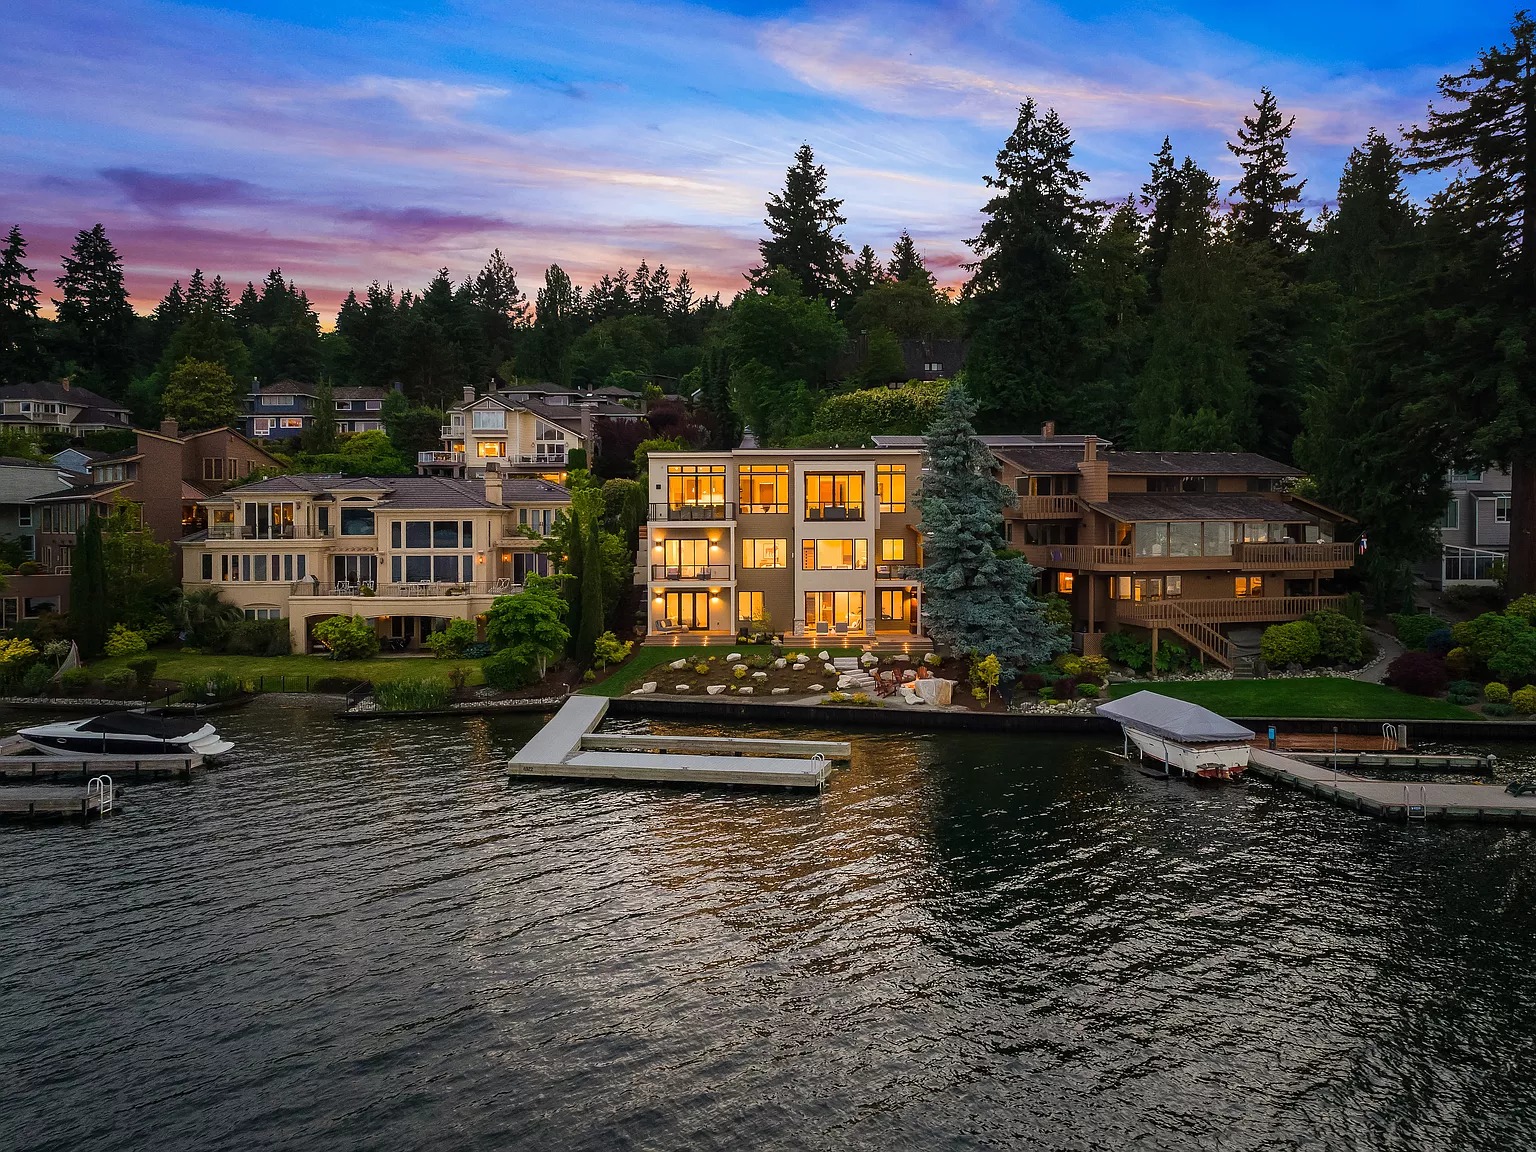 6922 96th Ave SE, Mercer Island, WA 98040 - $6,550,000 home for sale, house images, photos and pics gallery